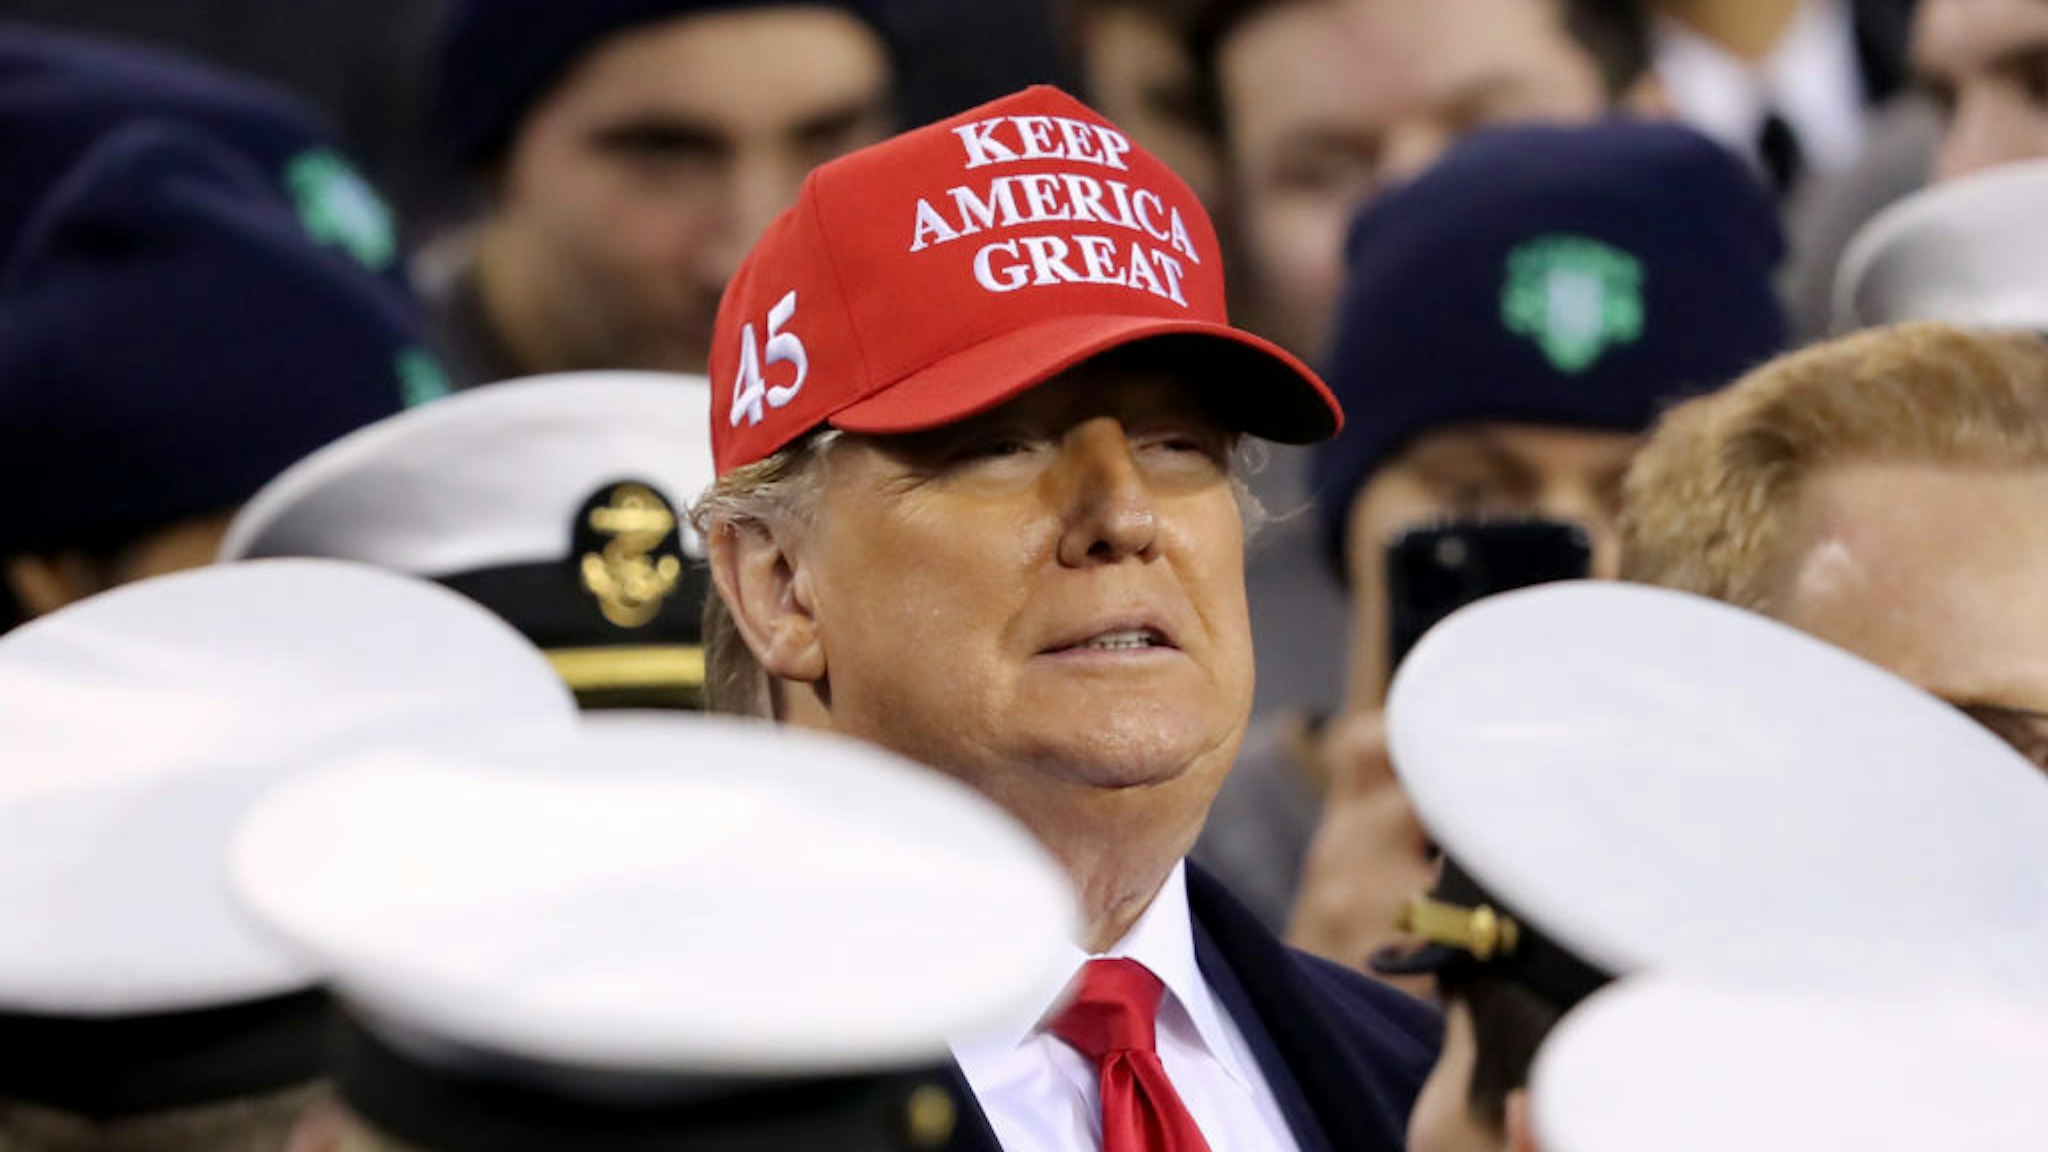 U.S. President Donald Trump stands with the Navy side of the field to start the second half of the game between the Army Black Knights and the Navy Midshipmen at Lincoln Financial Field on December 14, 2019 in Philadelphia, Pennsylvania. (Photo by Elsa/Getty Images)